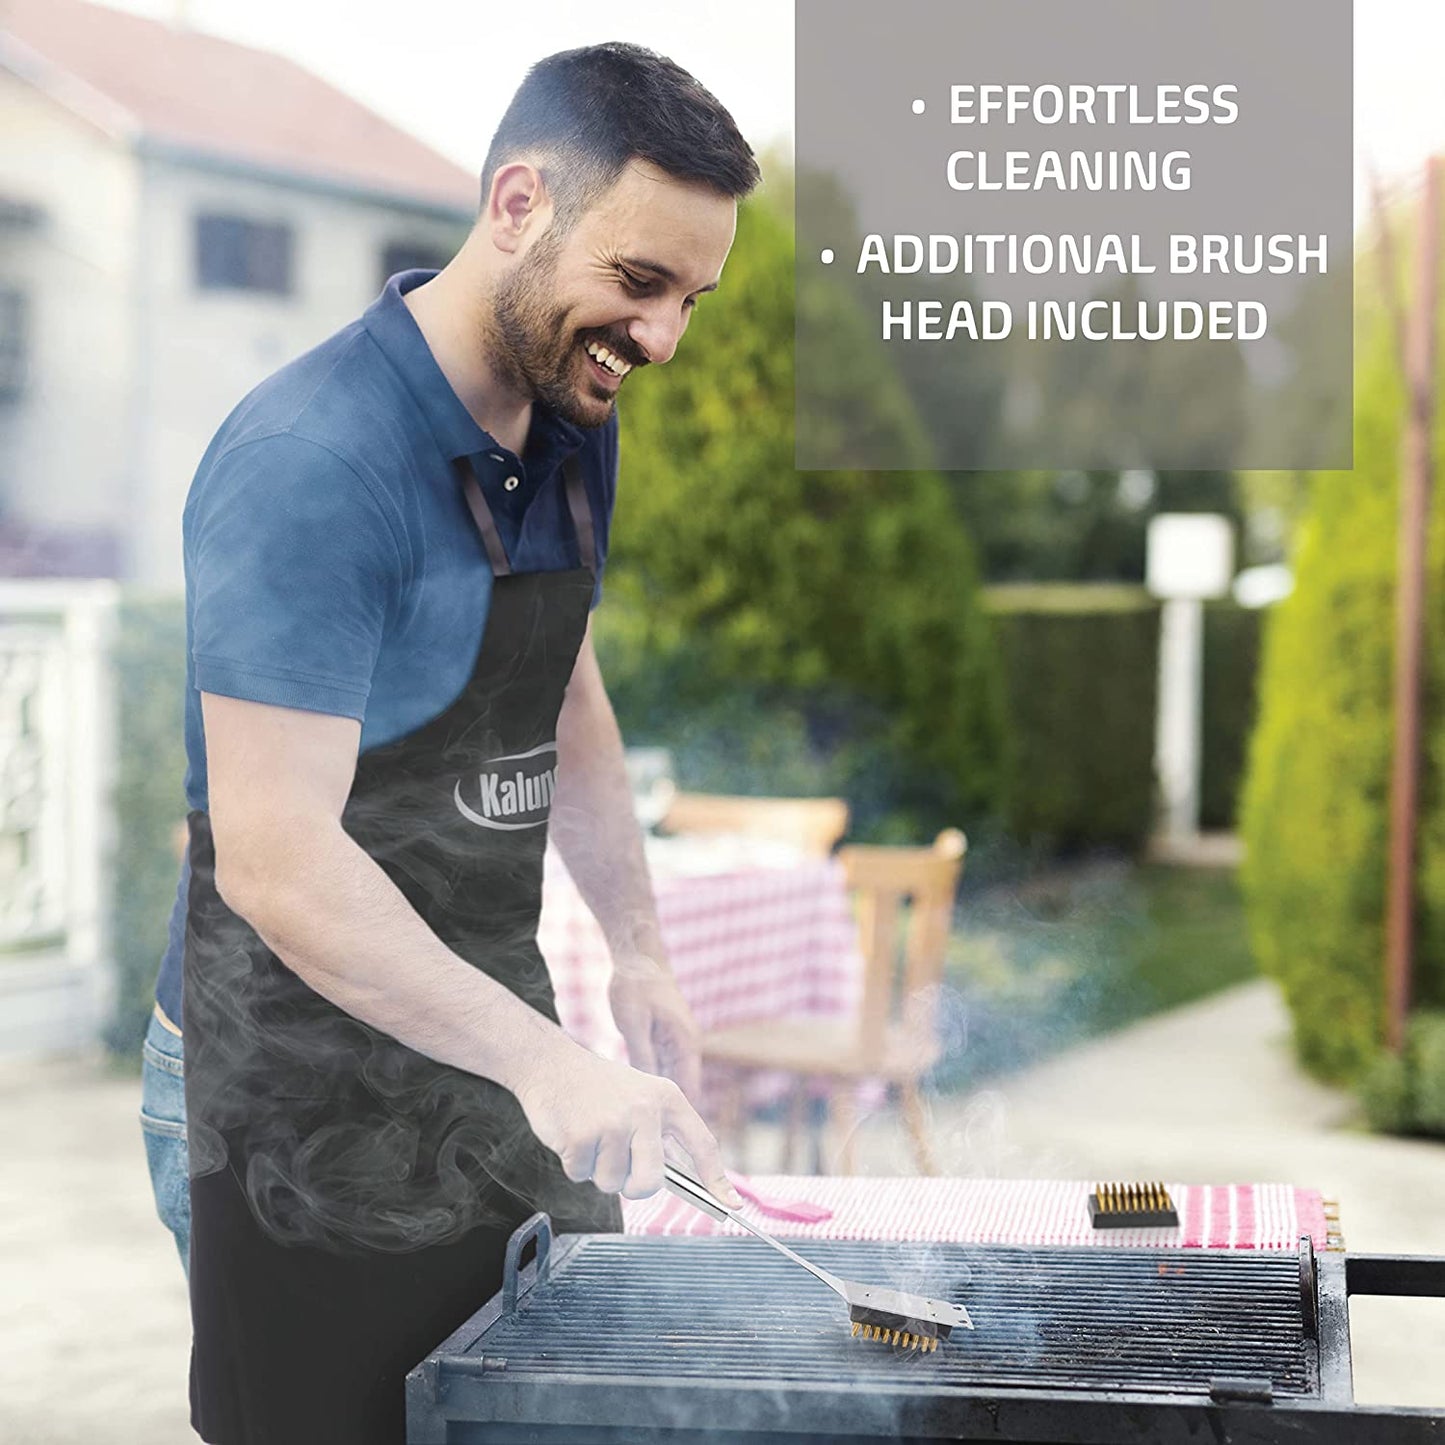 Premium Stainless Steel BBQ Grill Set with Aluminum Case and Apron - Complete Grill Accessories Kit for Outdoor Grilling - Ideal Gifts for Men